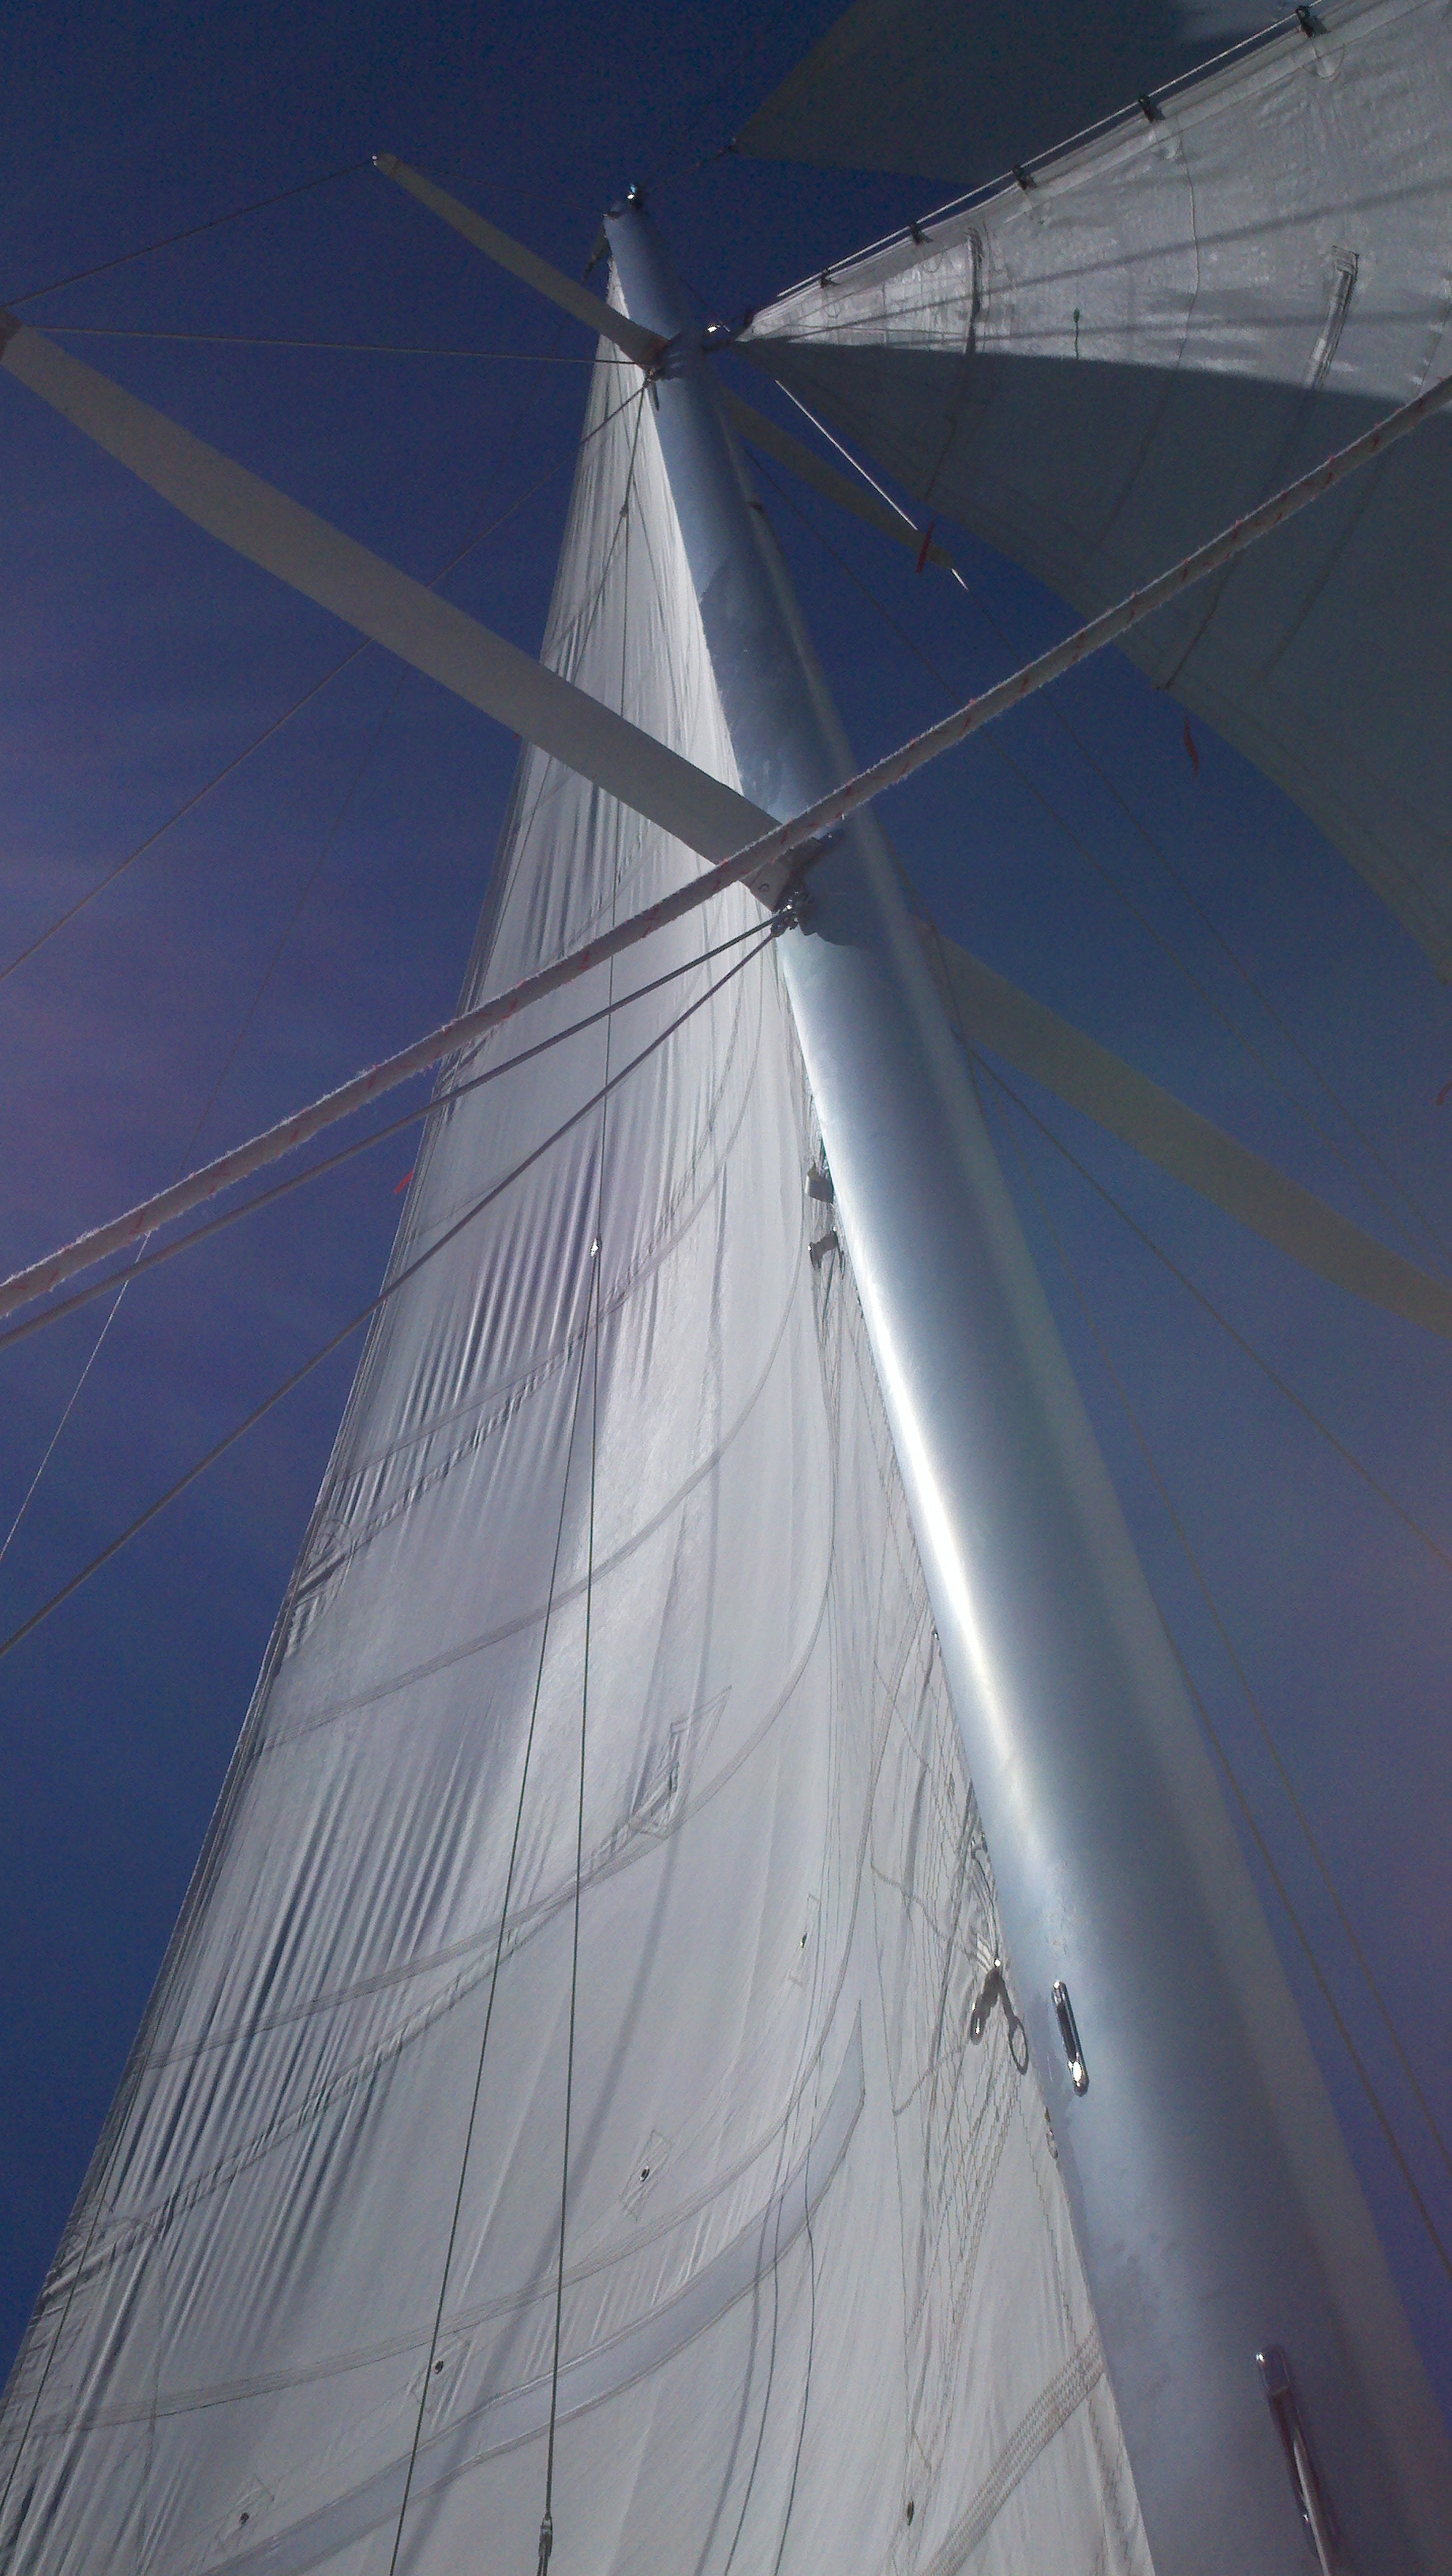 Sails in the Blue sky